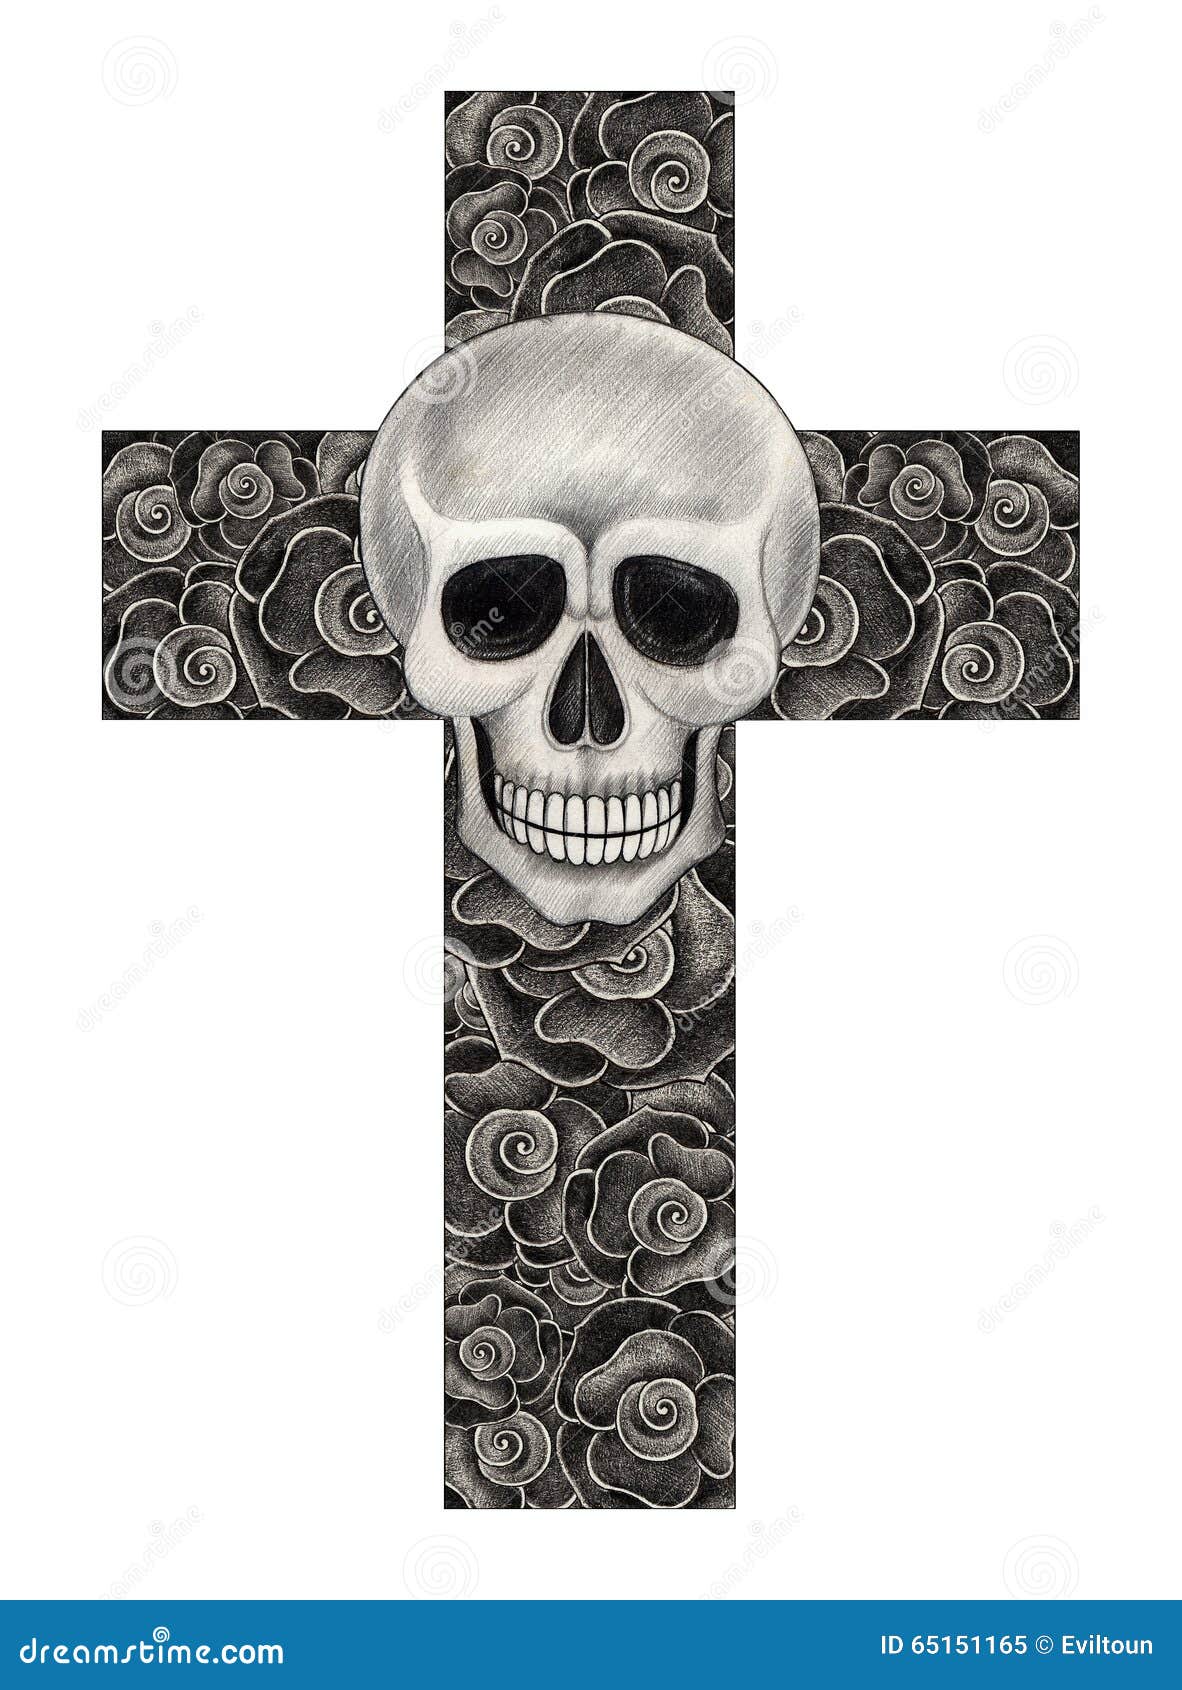 Details more than 76 skull and cross tattoo best - in.cdgdbentre